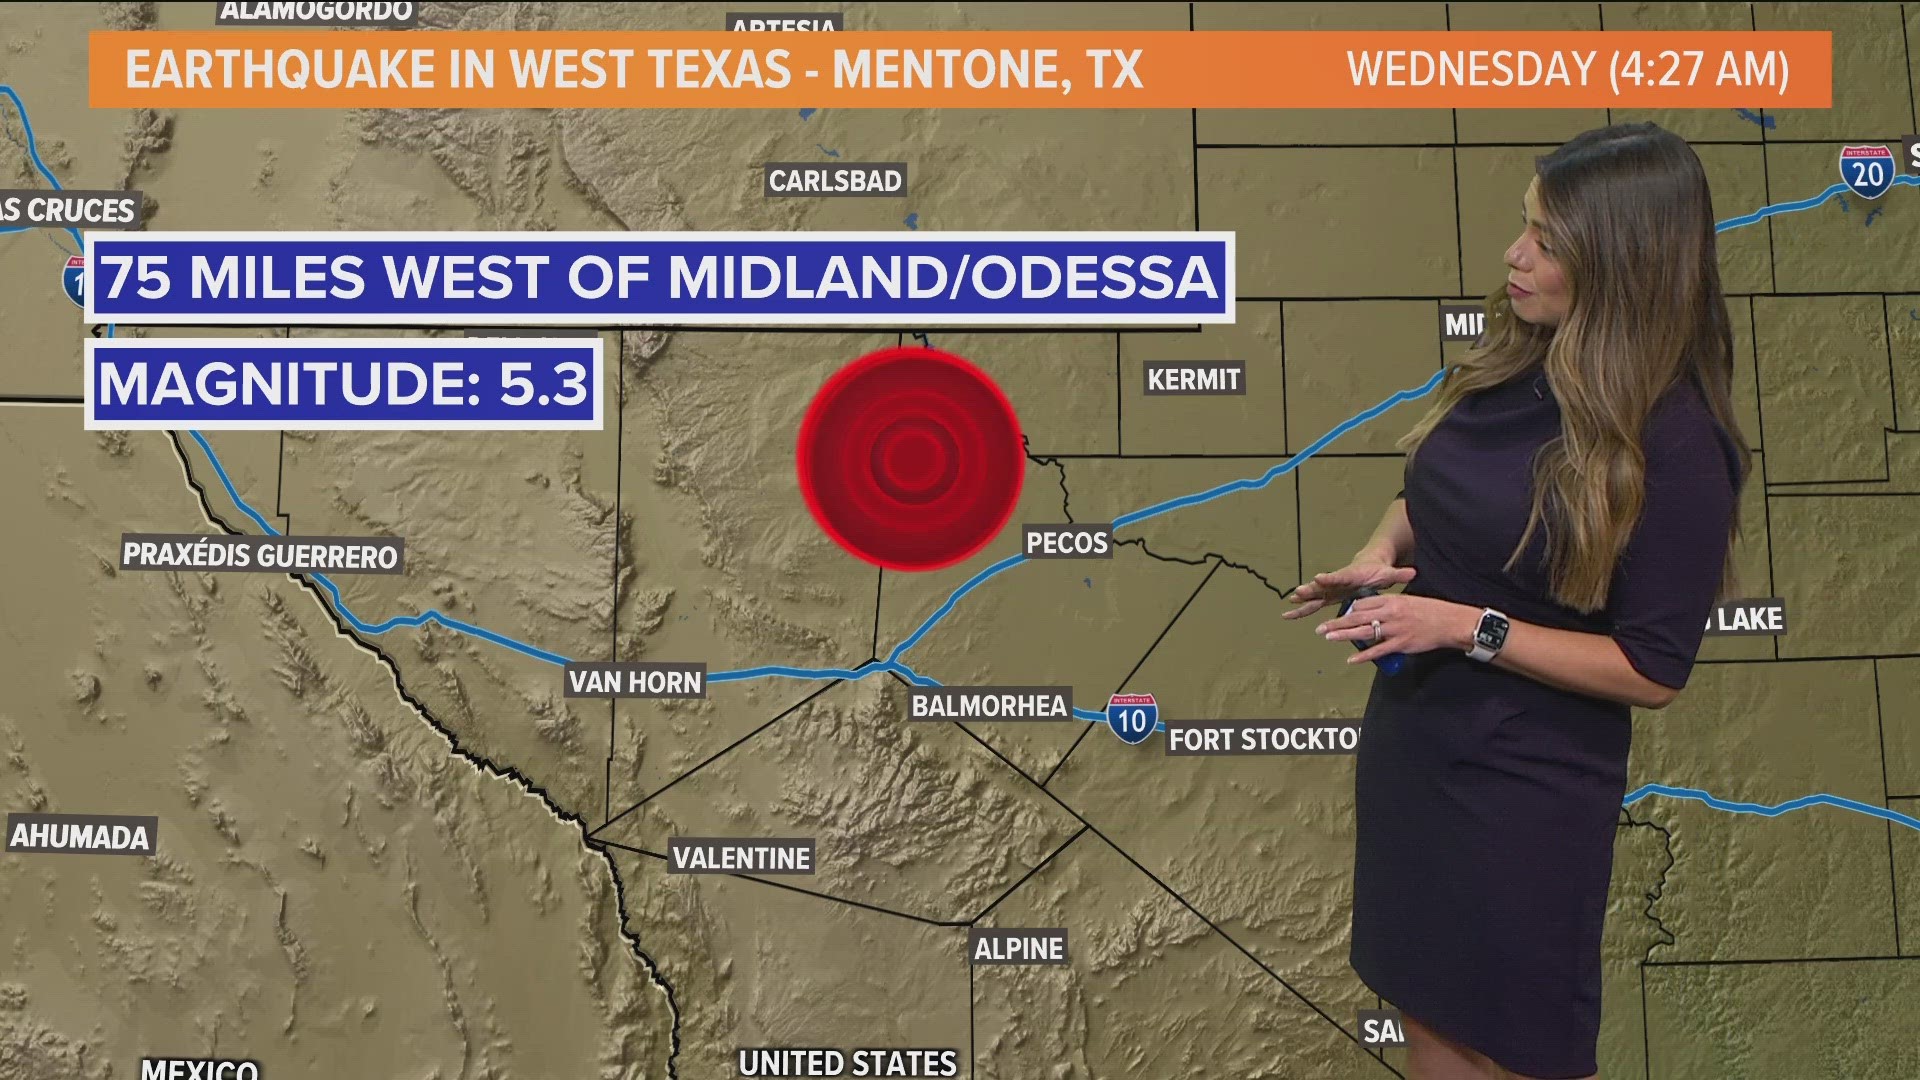 The quake hit about 22 miles southwest of Mentone, Texas at about 3:27 a.m. on Wednesday.